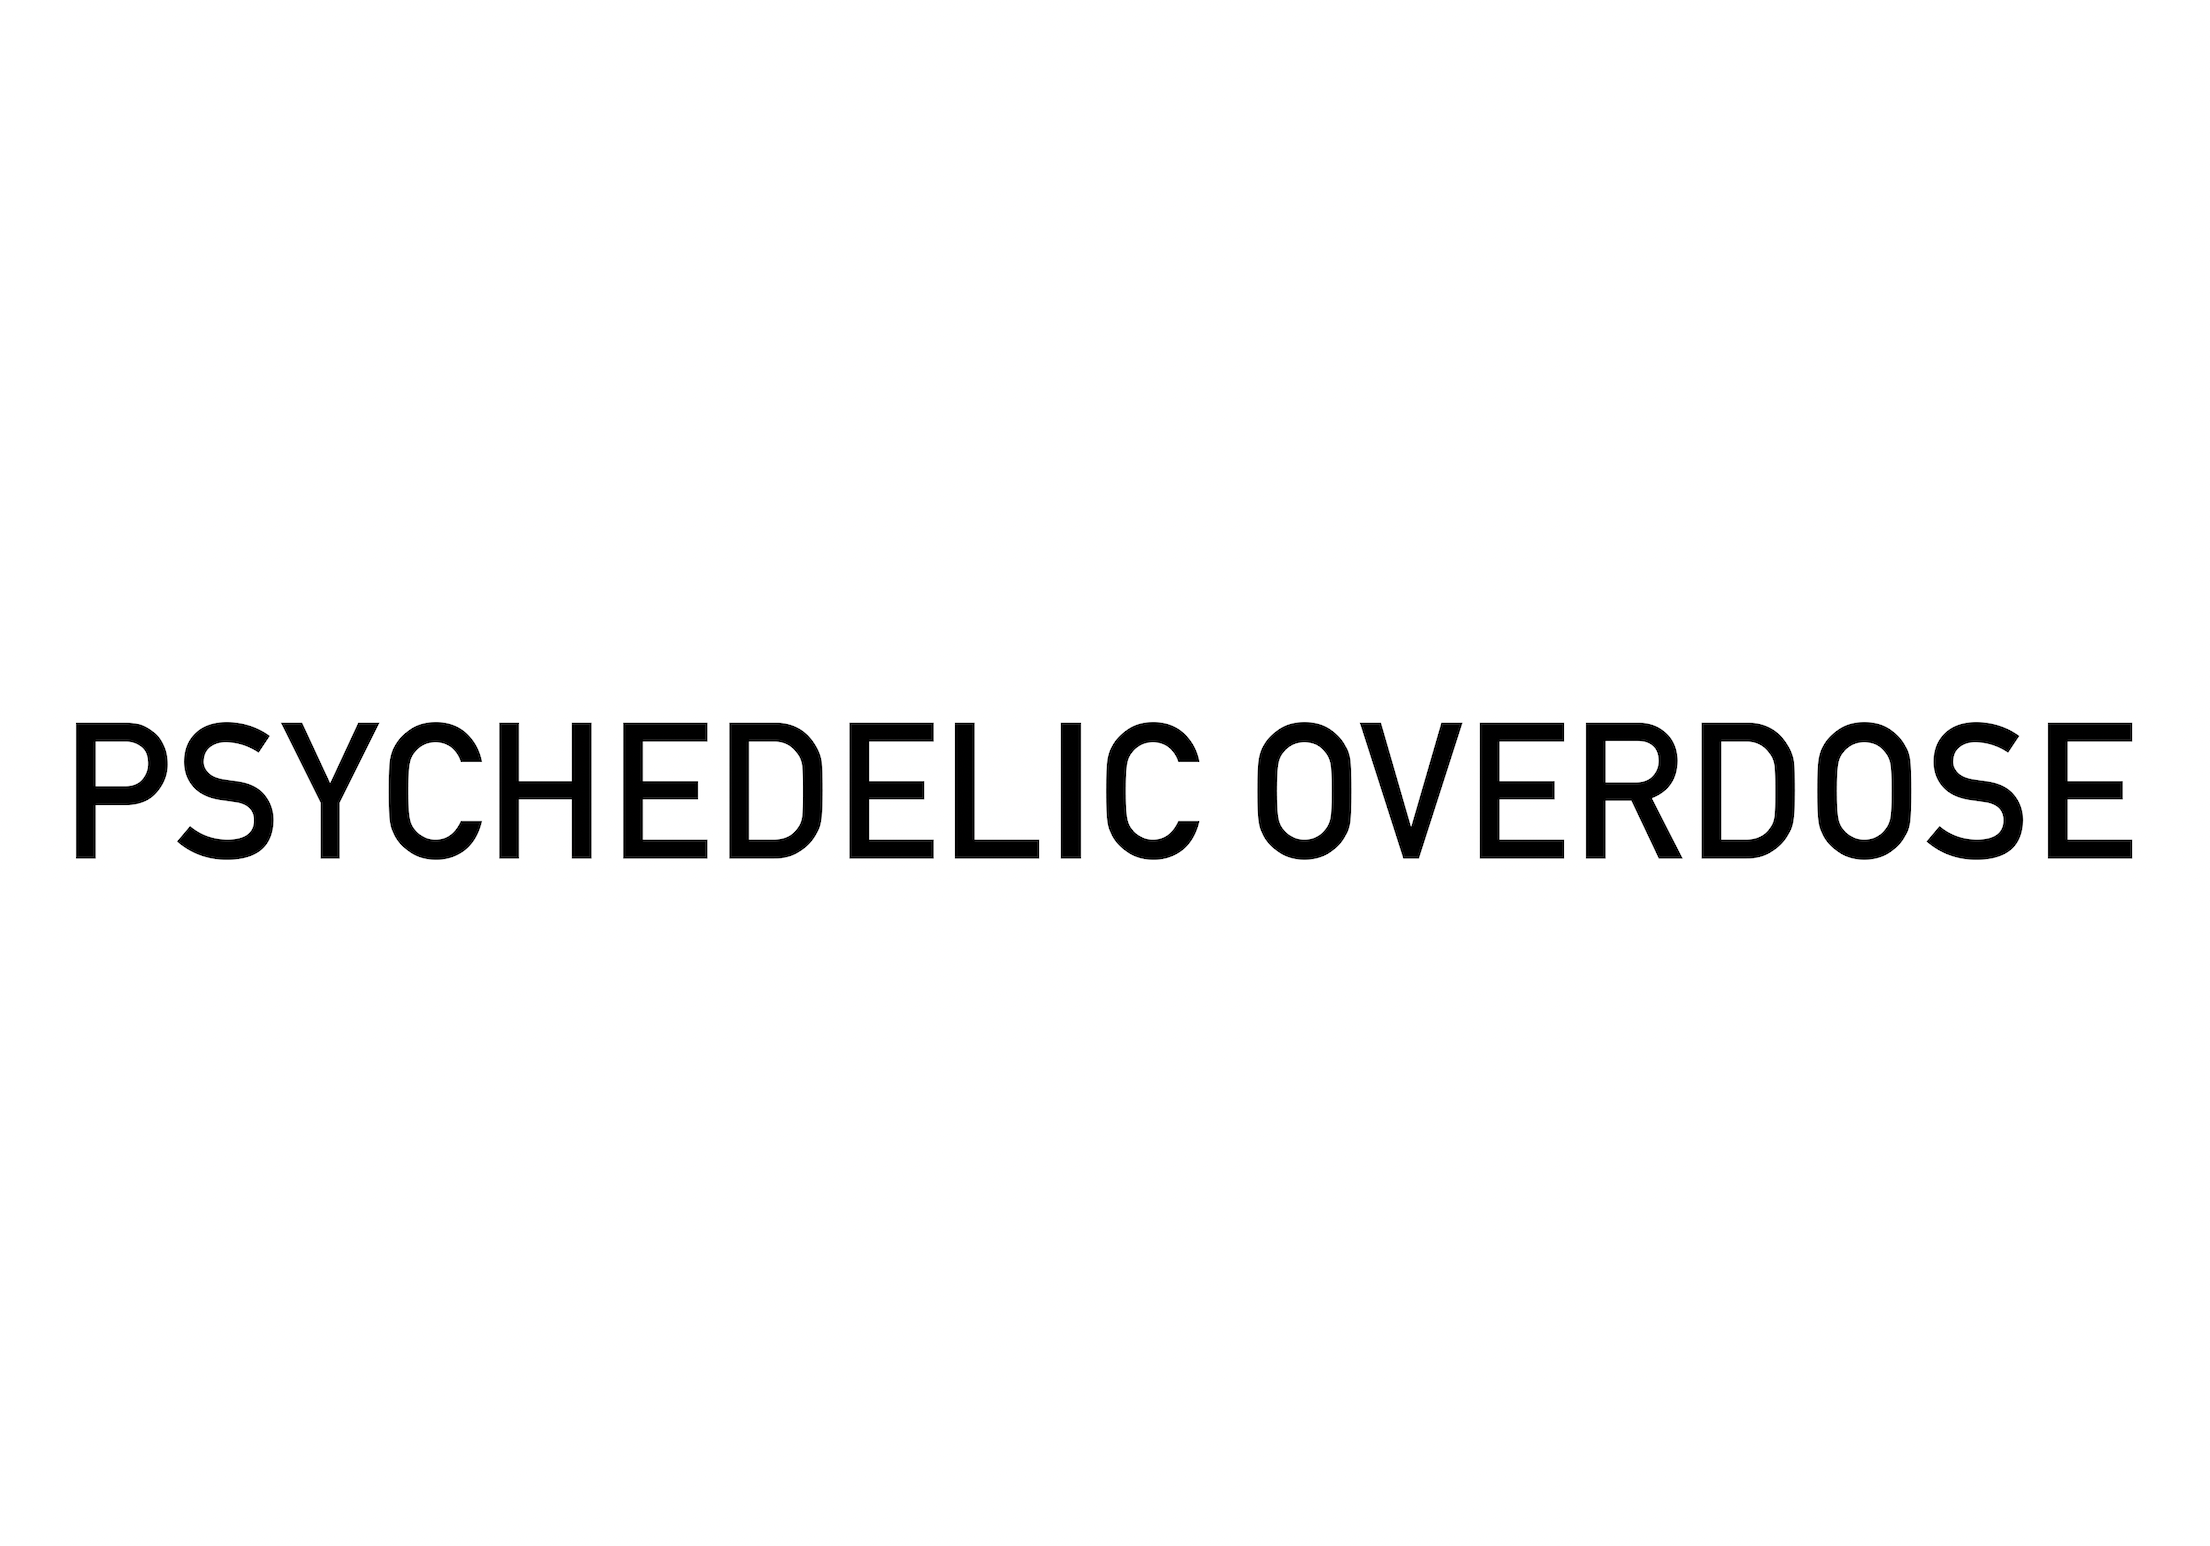 Psychedelic Overdose